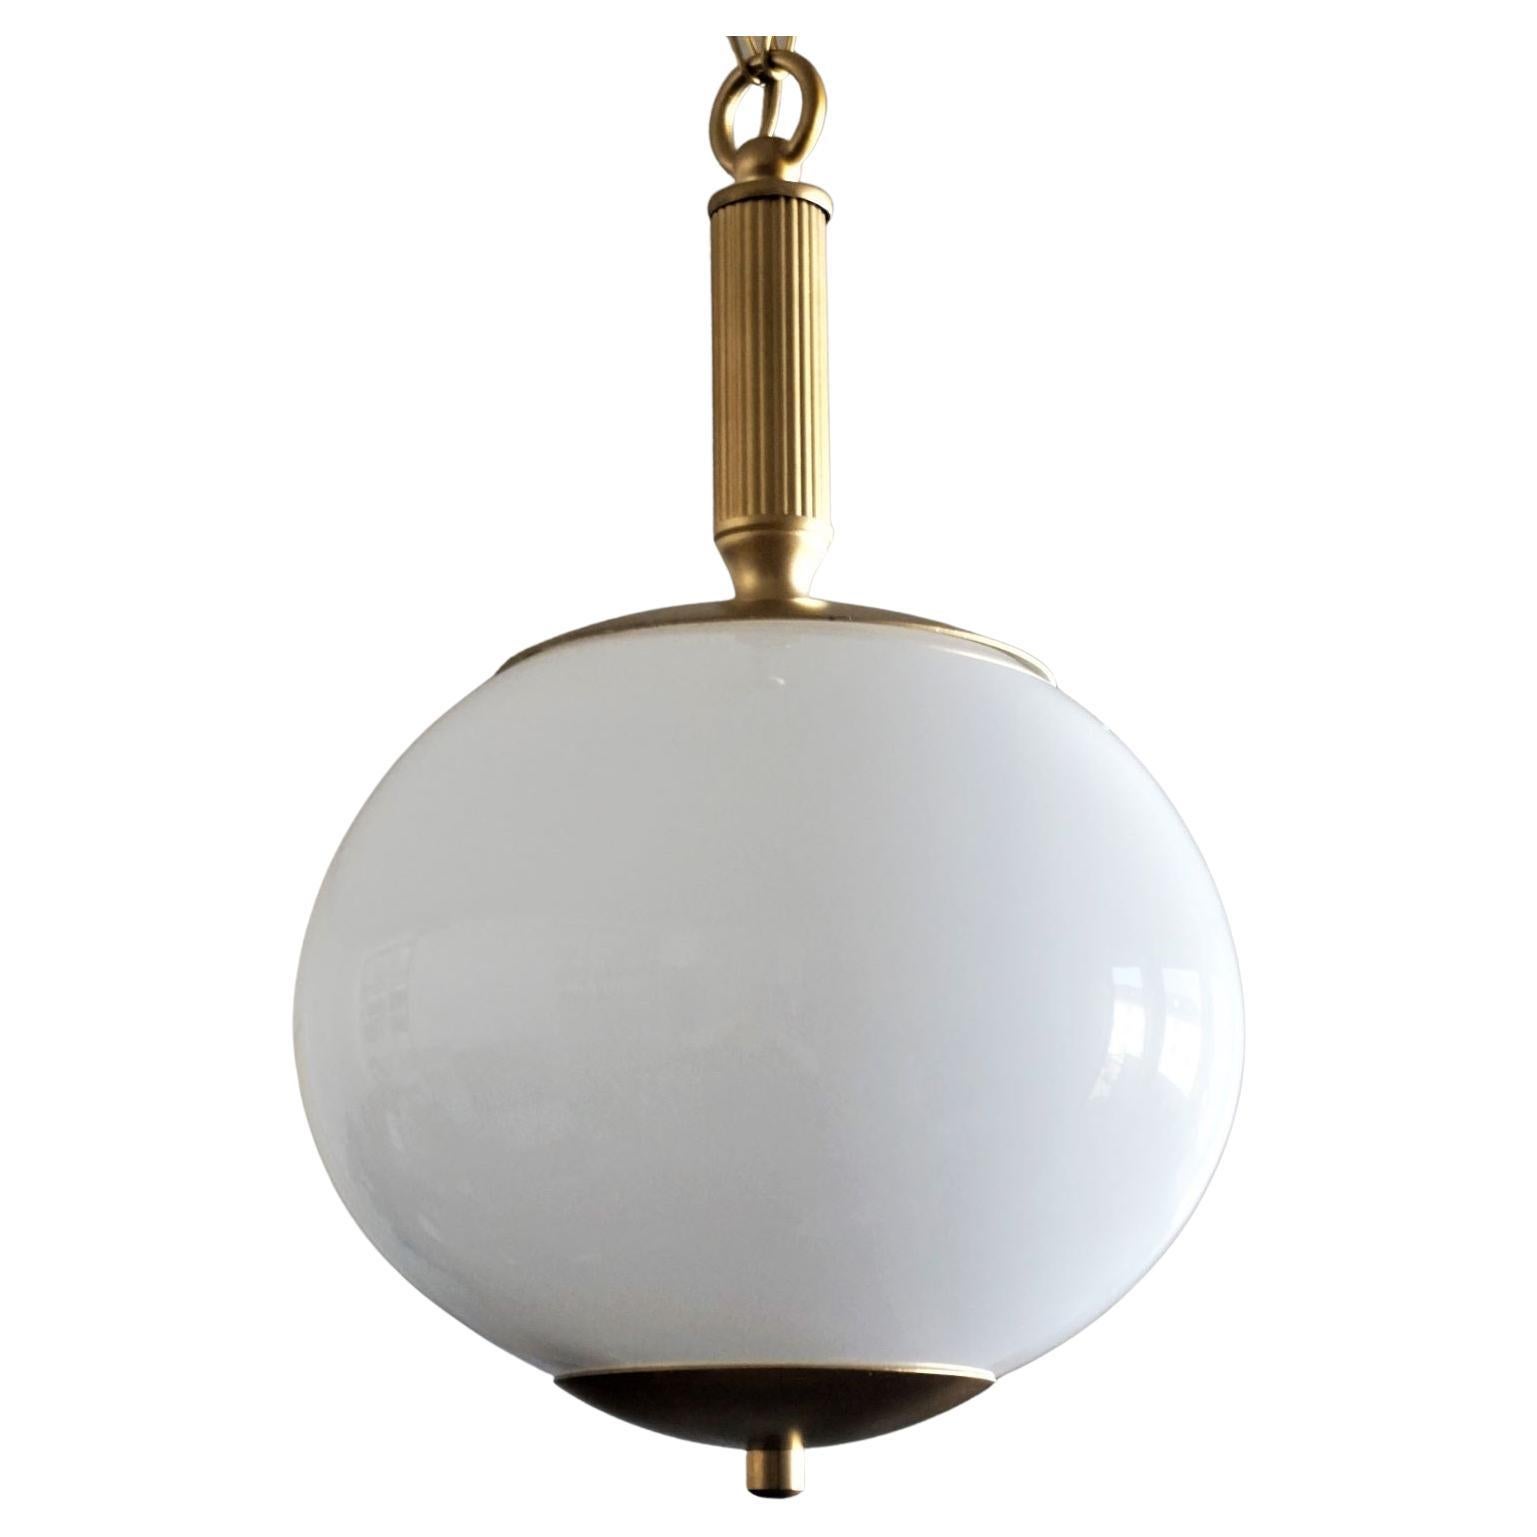 Pair of hand blown oval opaline globe pendants, brass mounts, chain and canopy, Italy, 1950s.
With a single brass and porcelain Edison E-27 light socket for large sized bulb (each pendant).
Measures: Height 33 in / 84 cm, adjustable by extending